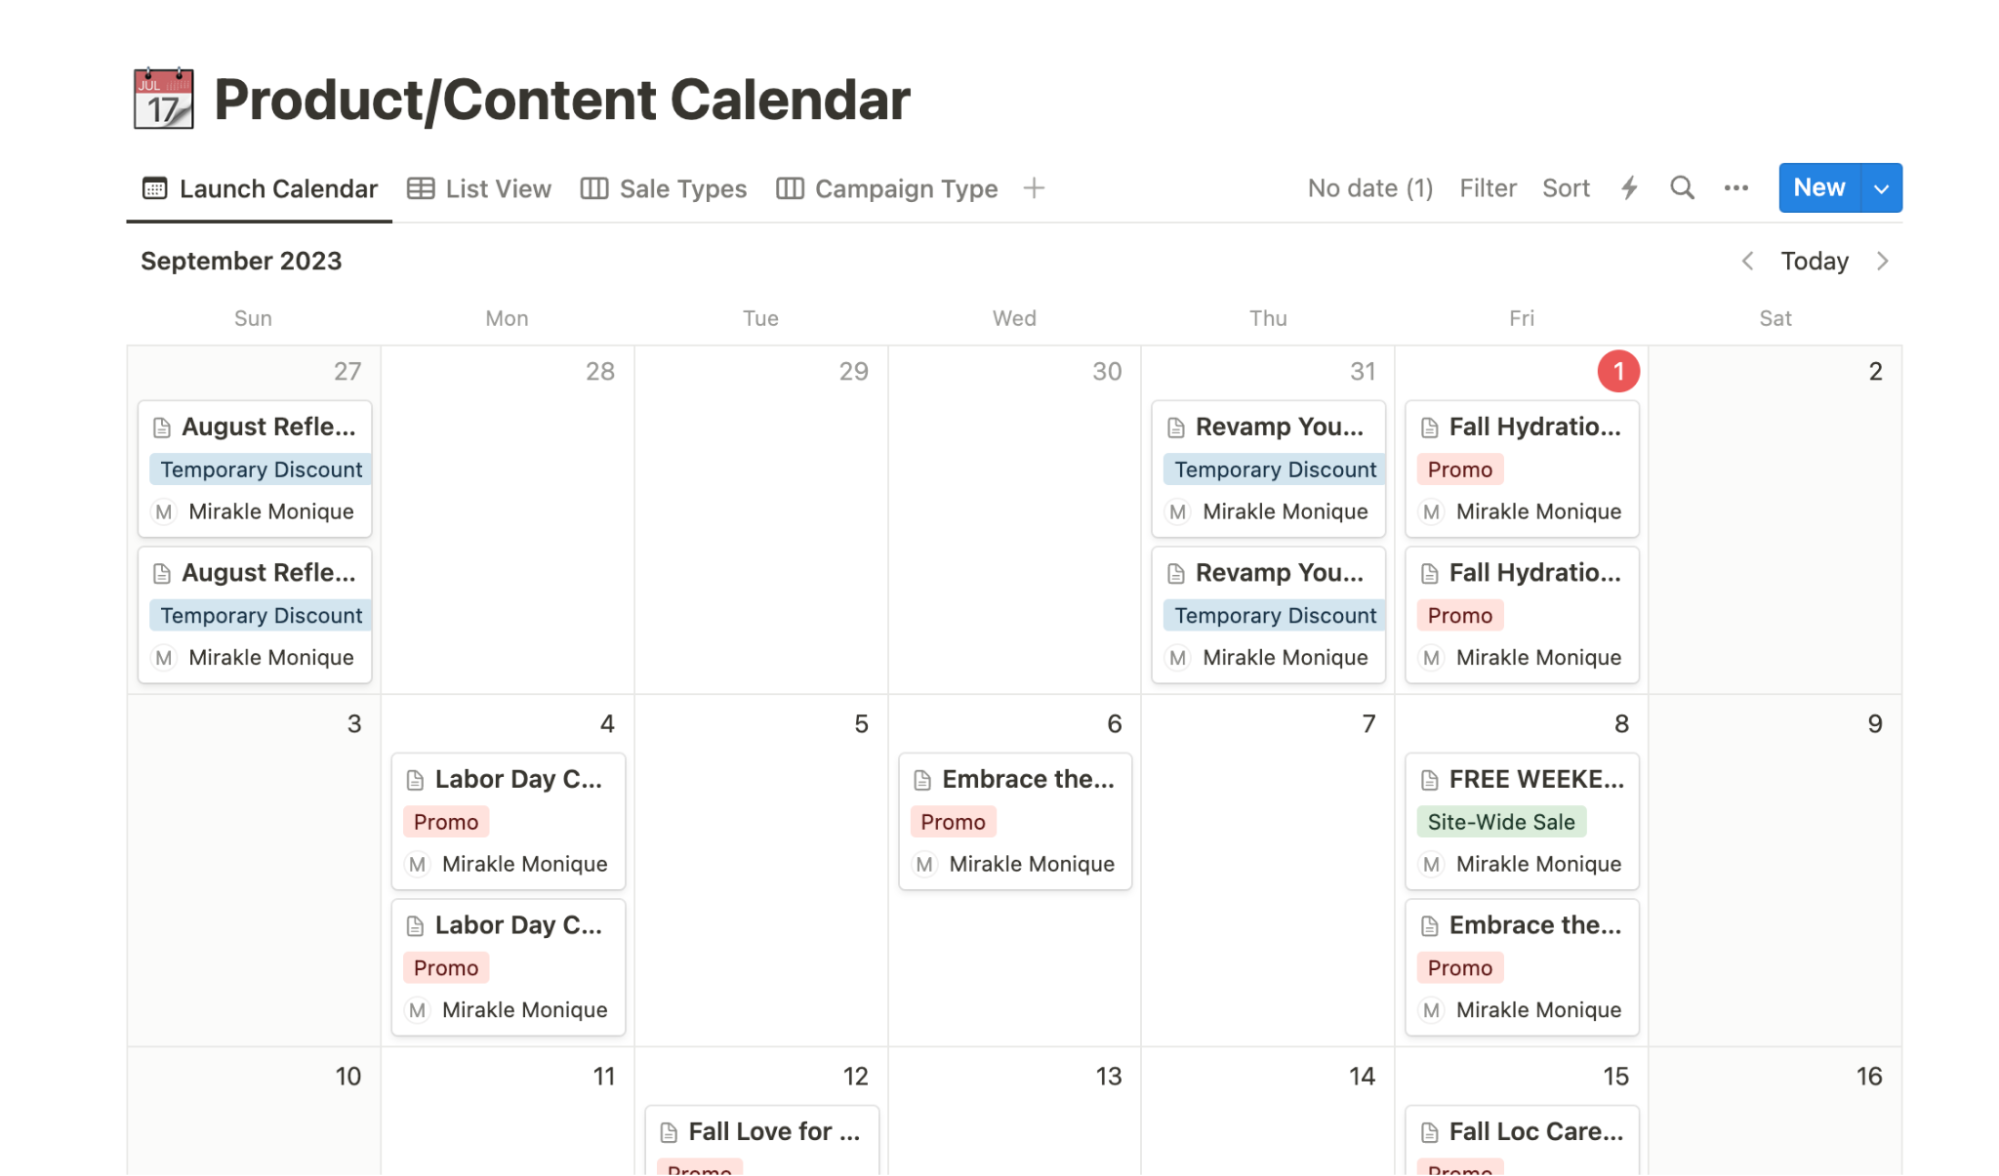 Email/SMS Product Content Calendar